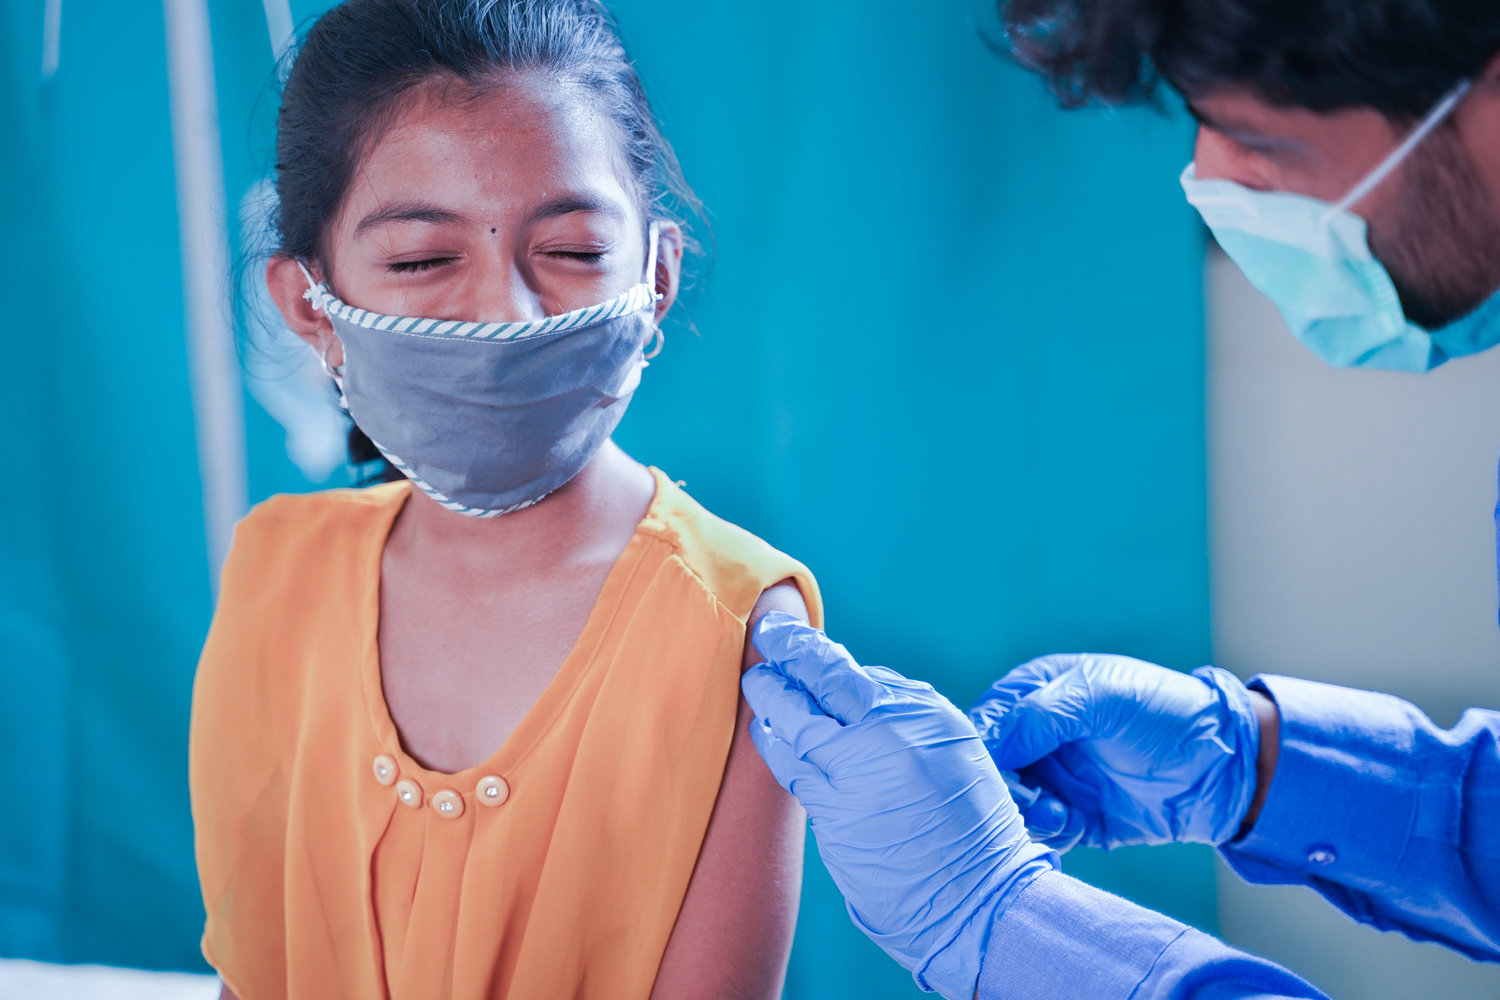 Nearly all children attending Washington’s K-12 schools are now eligible for a COVID-19 vaccine, to the relief of many parents.